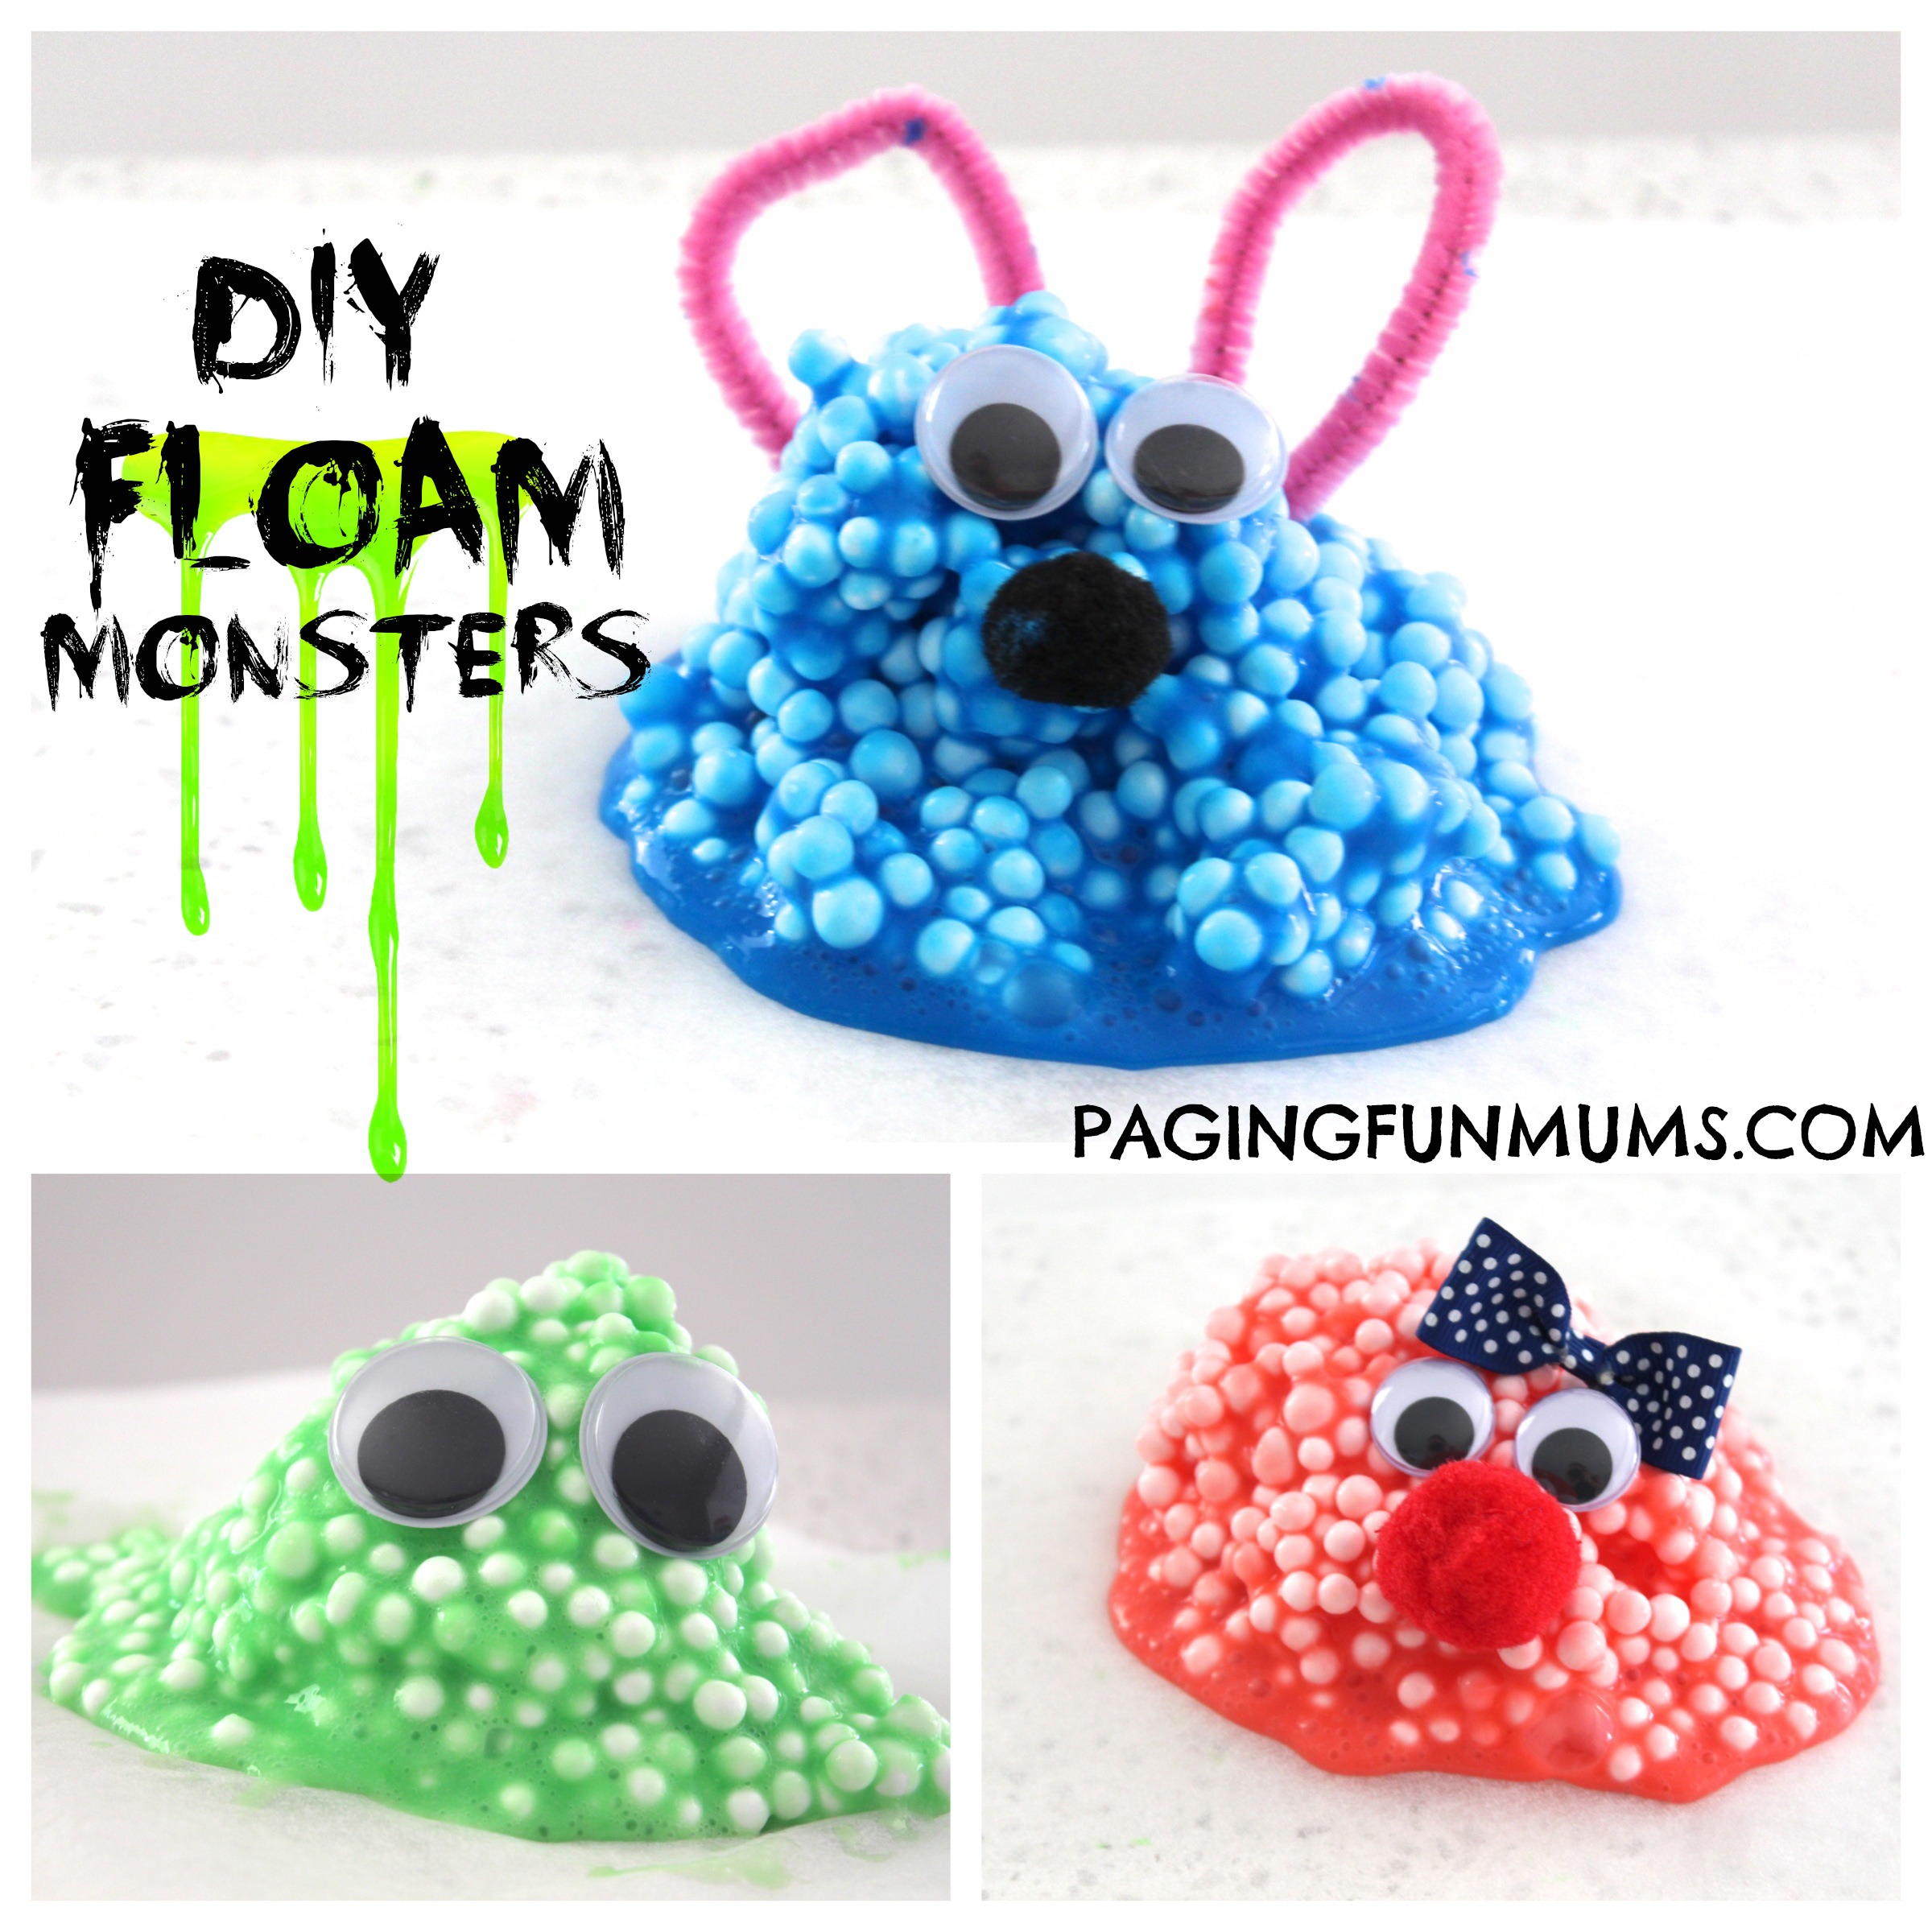 Floam Slime - The Best Ideas for Kids